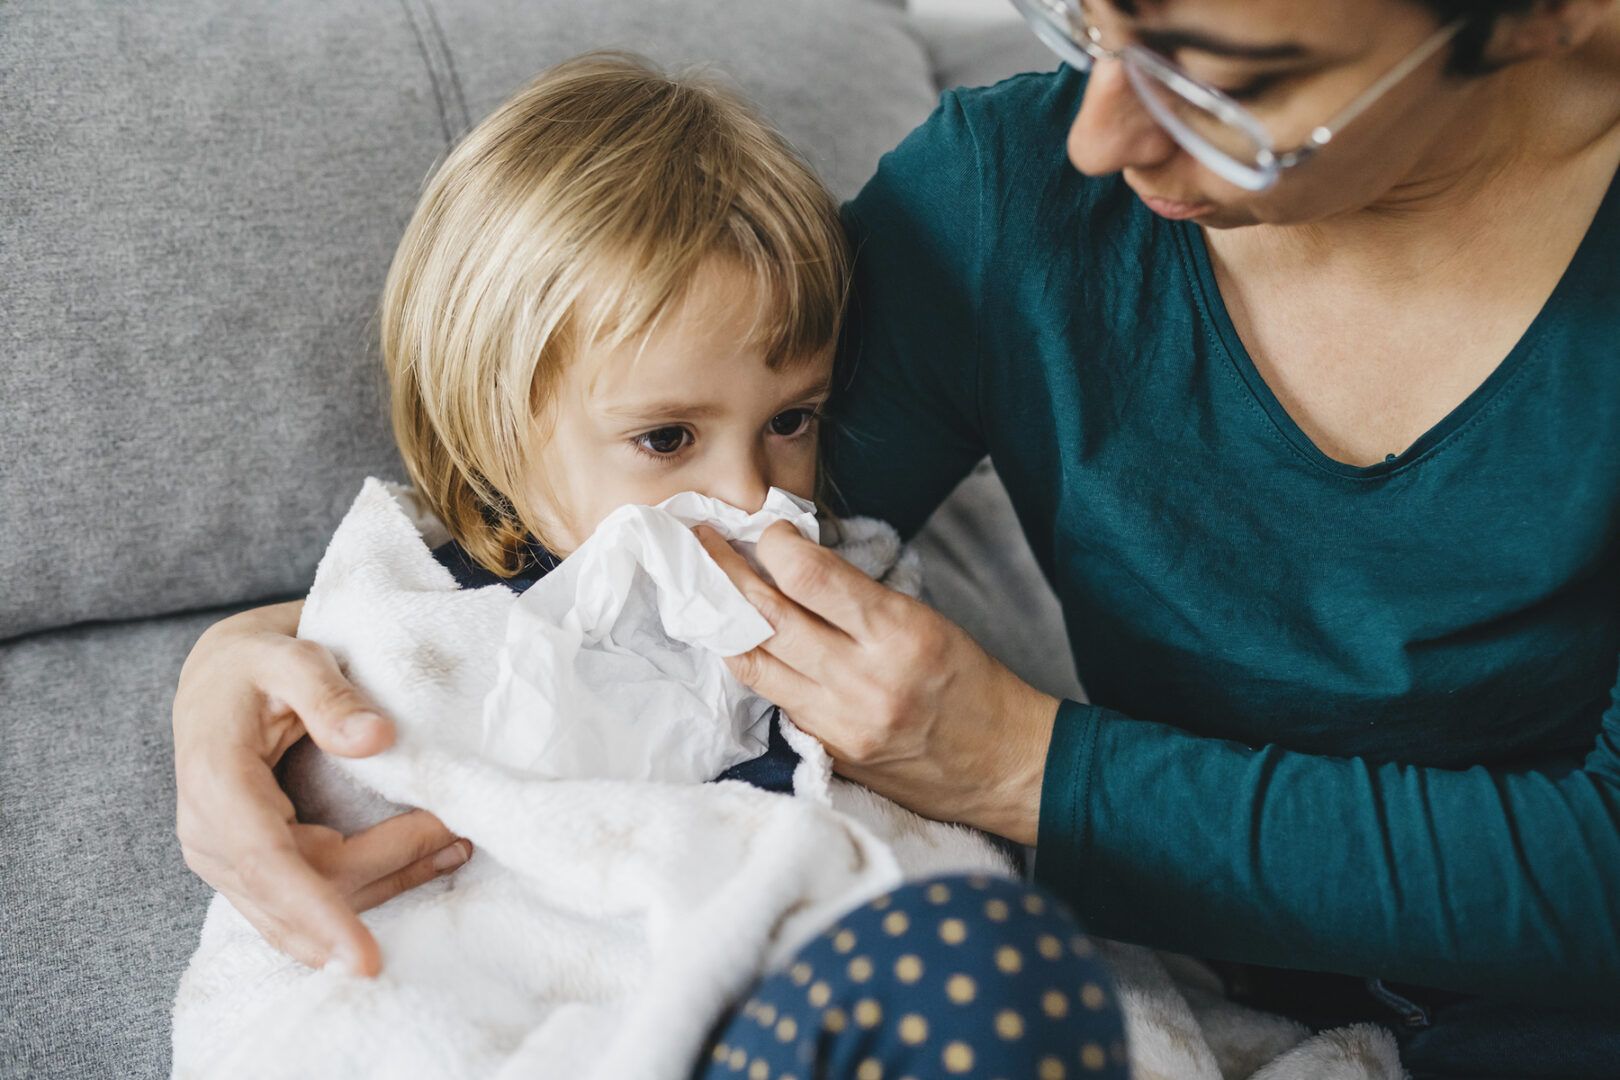 caring for the sick